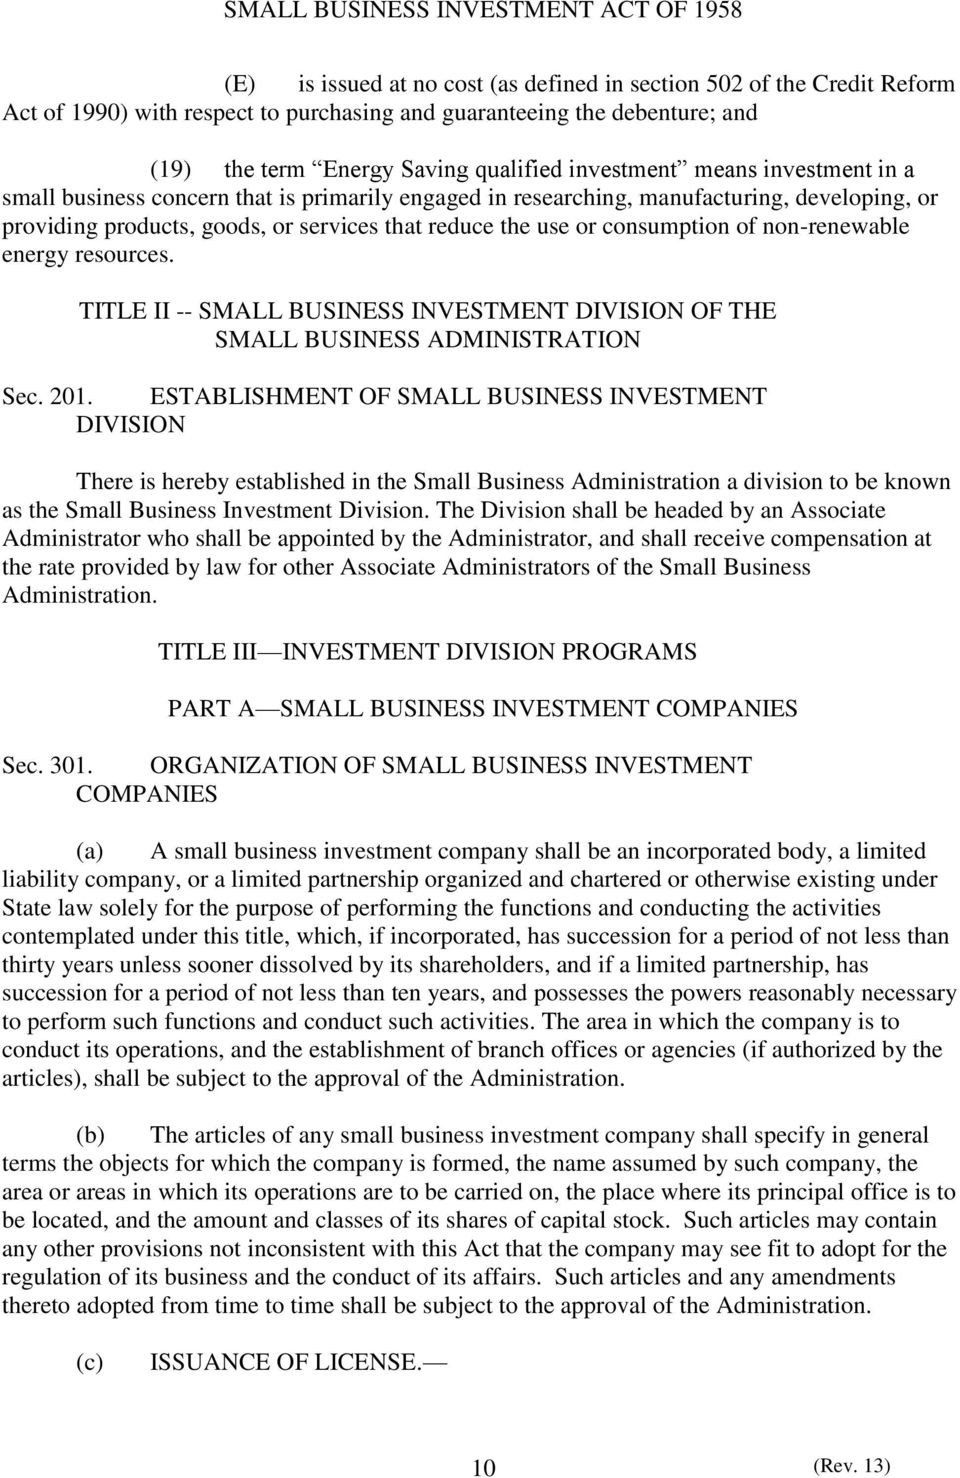 non-renewable energy resources. TITLE II -- SMALL BUSINESS INVESTMENT DIVISION OF THE SMALL BUSINESS ADMINISTRATION Sec. 201.